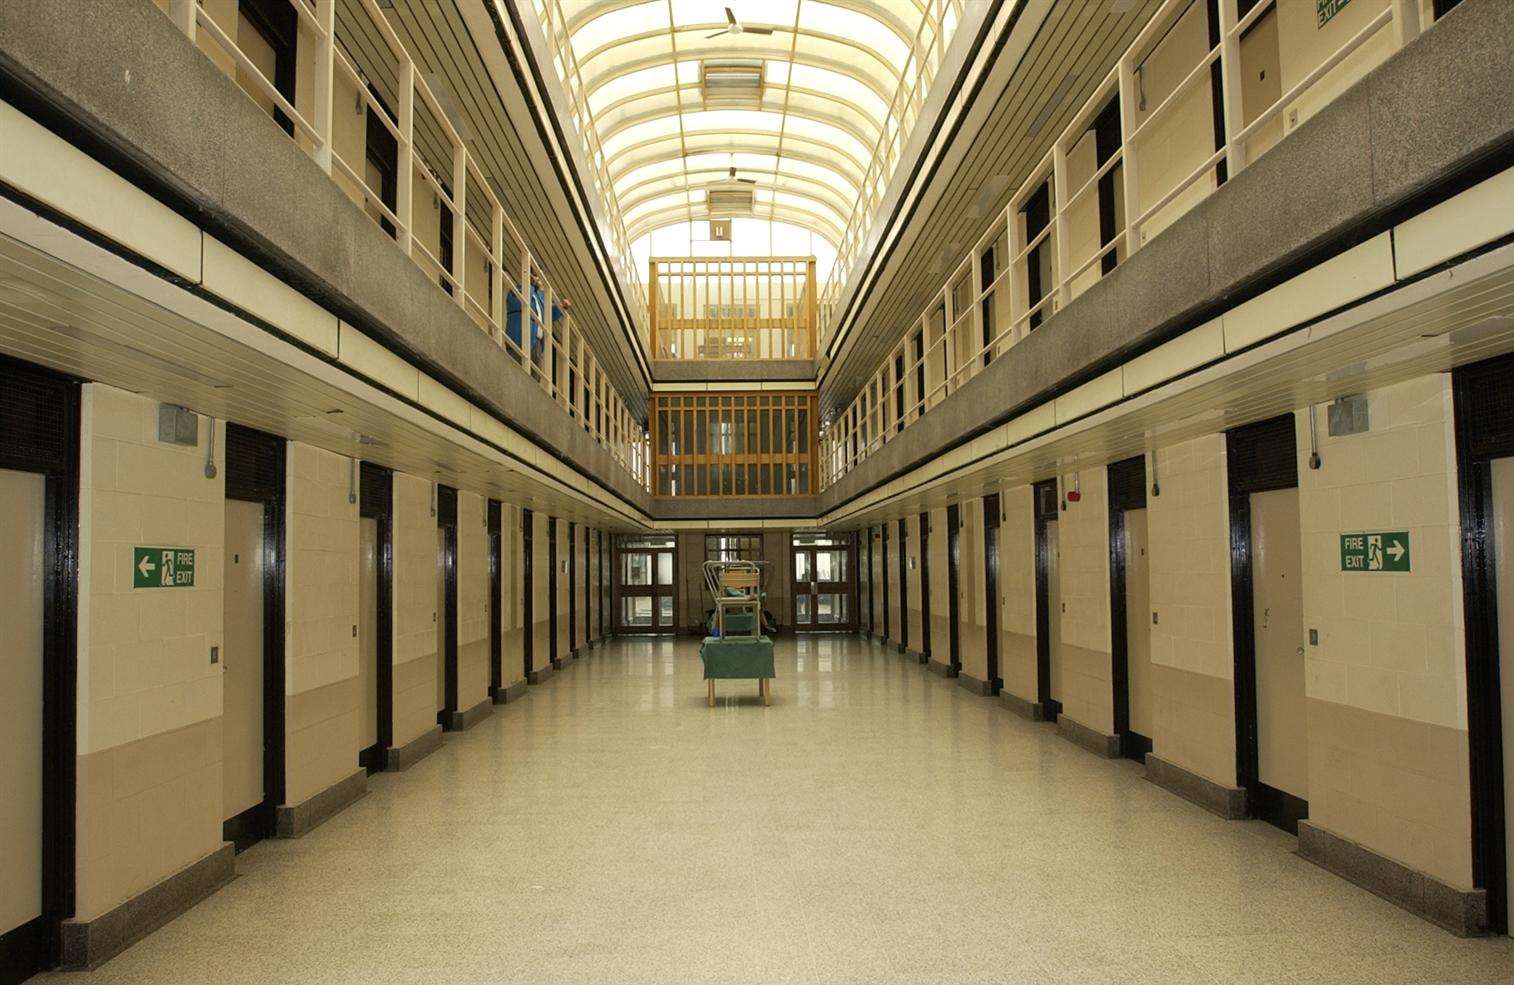 The inside of the prison